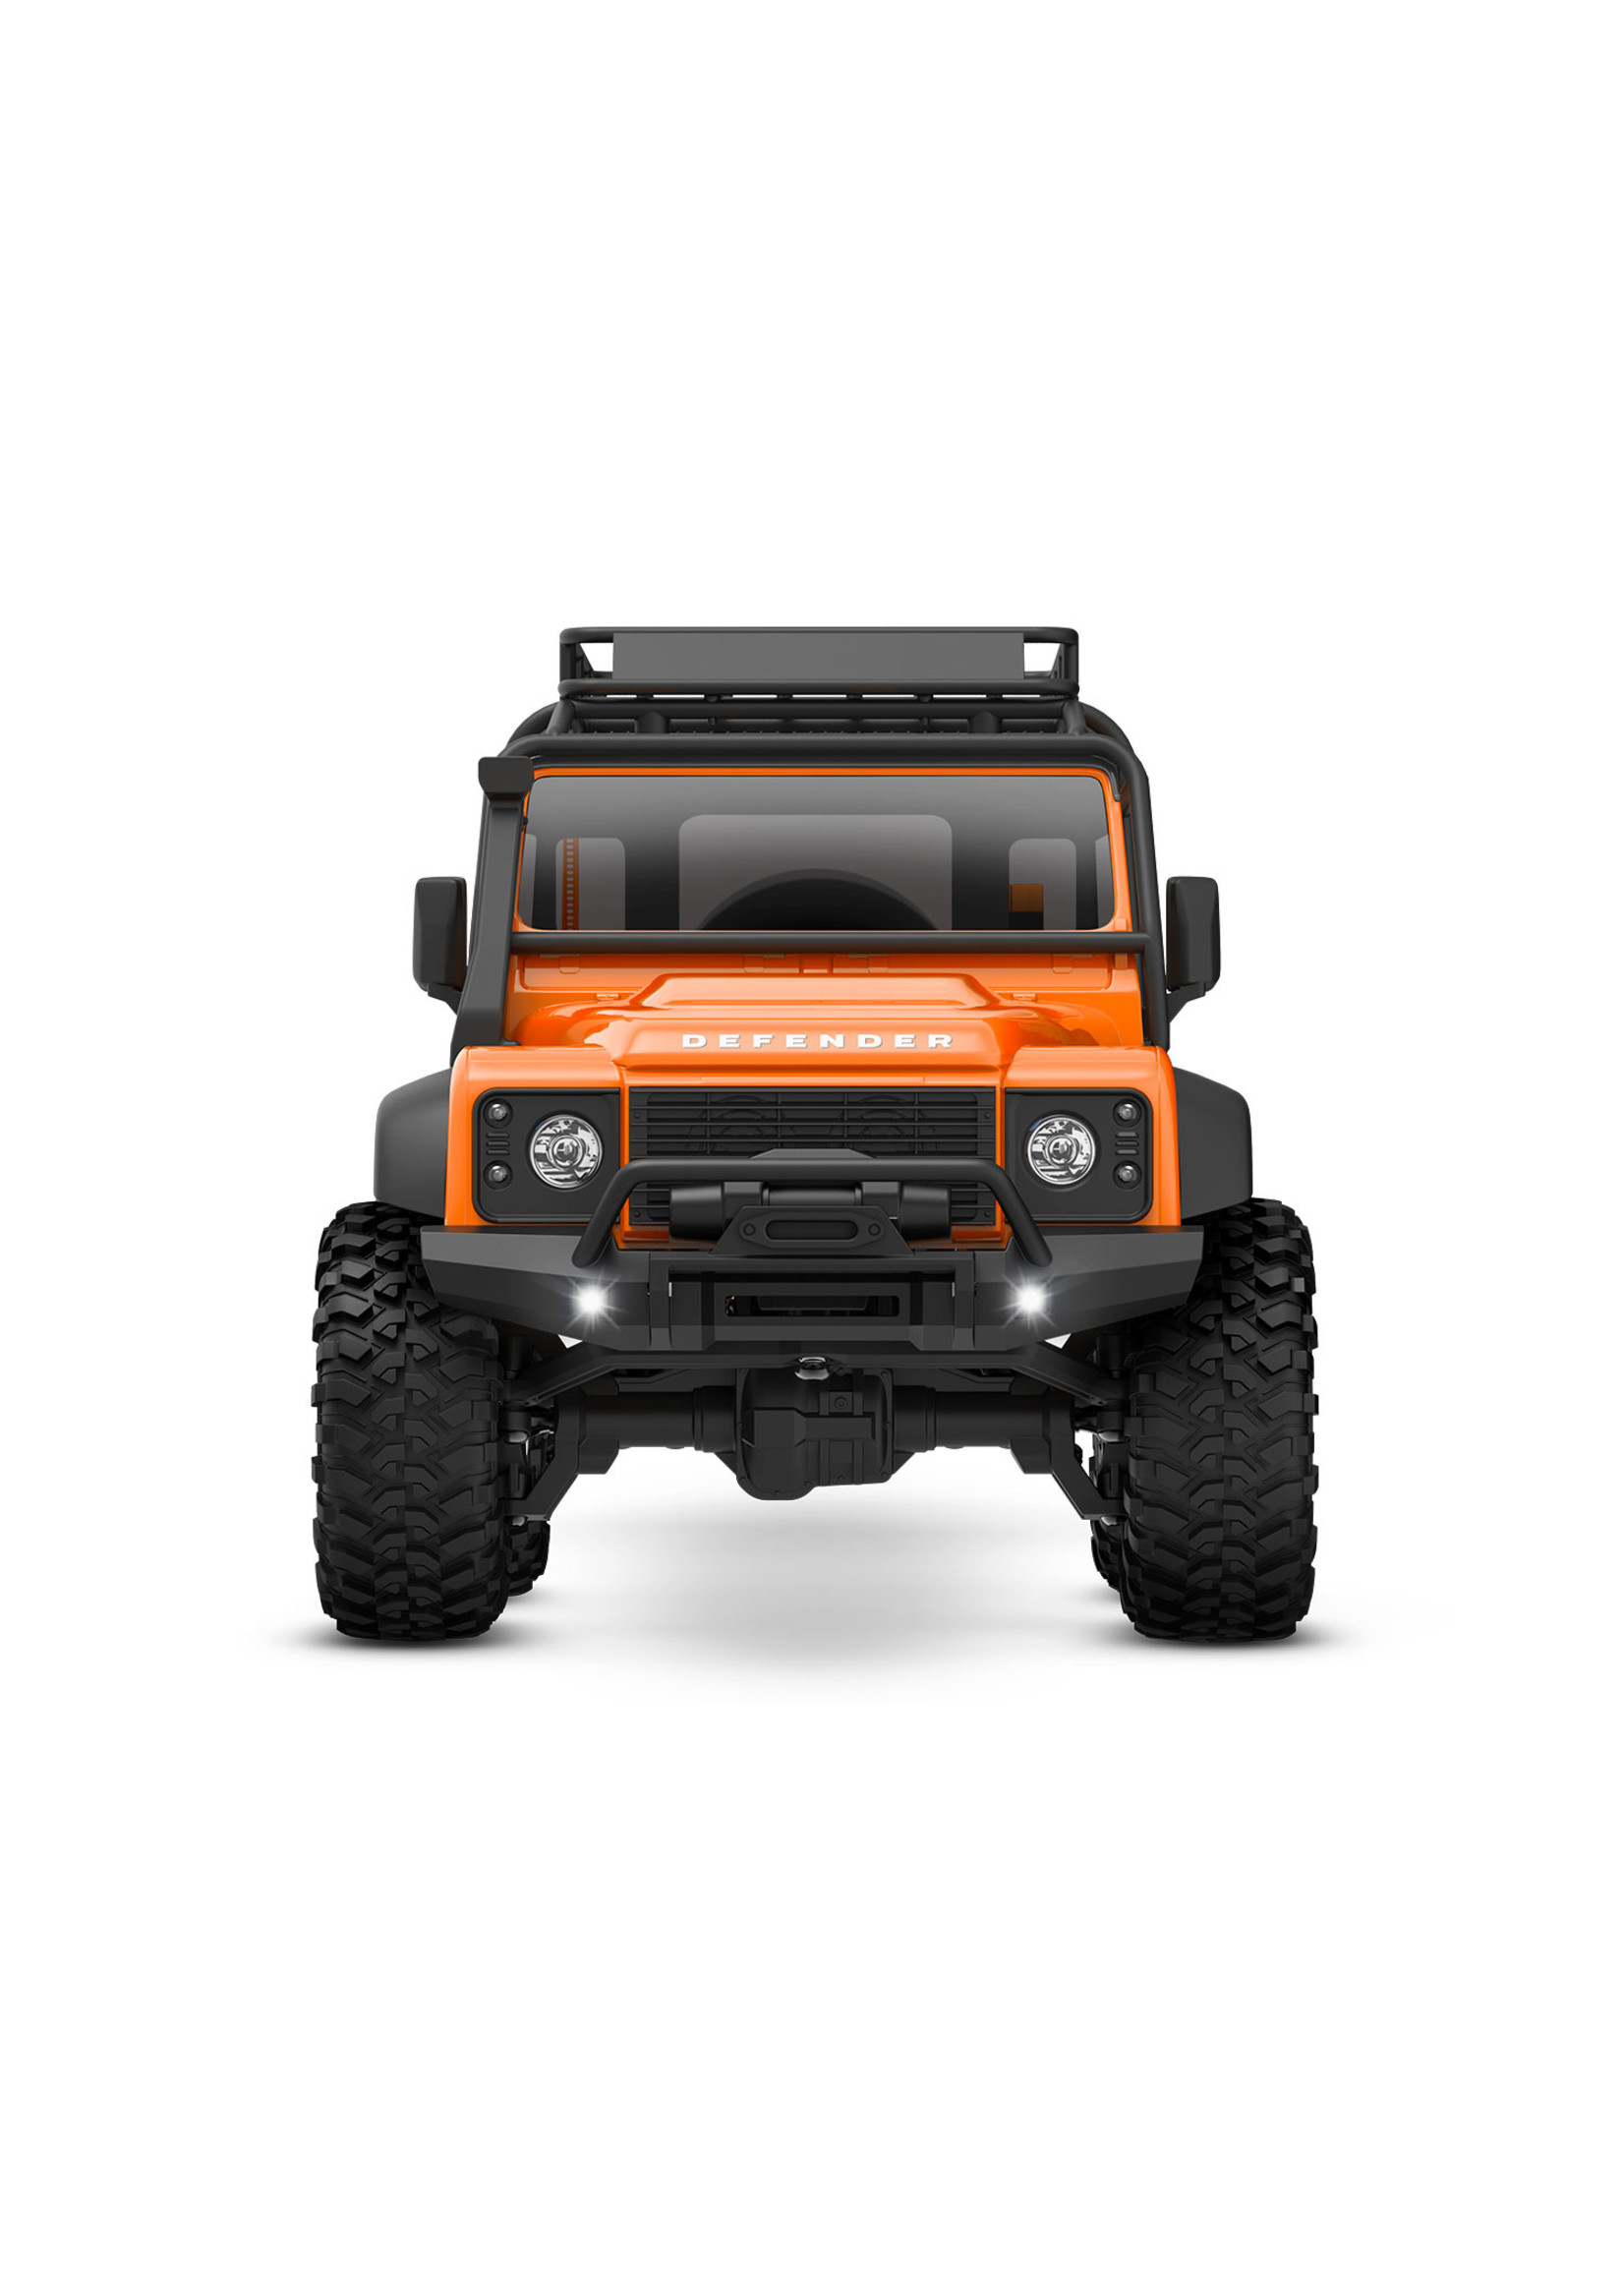 Traxxas 970541ORNG - 1/18 RTR Scale and Trail Defender - Orange